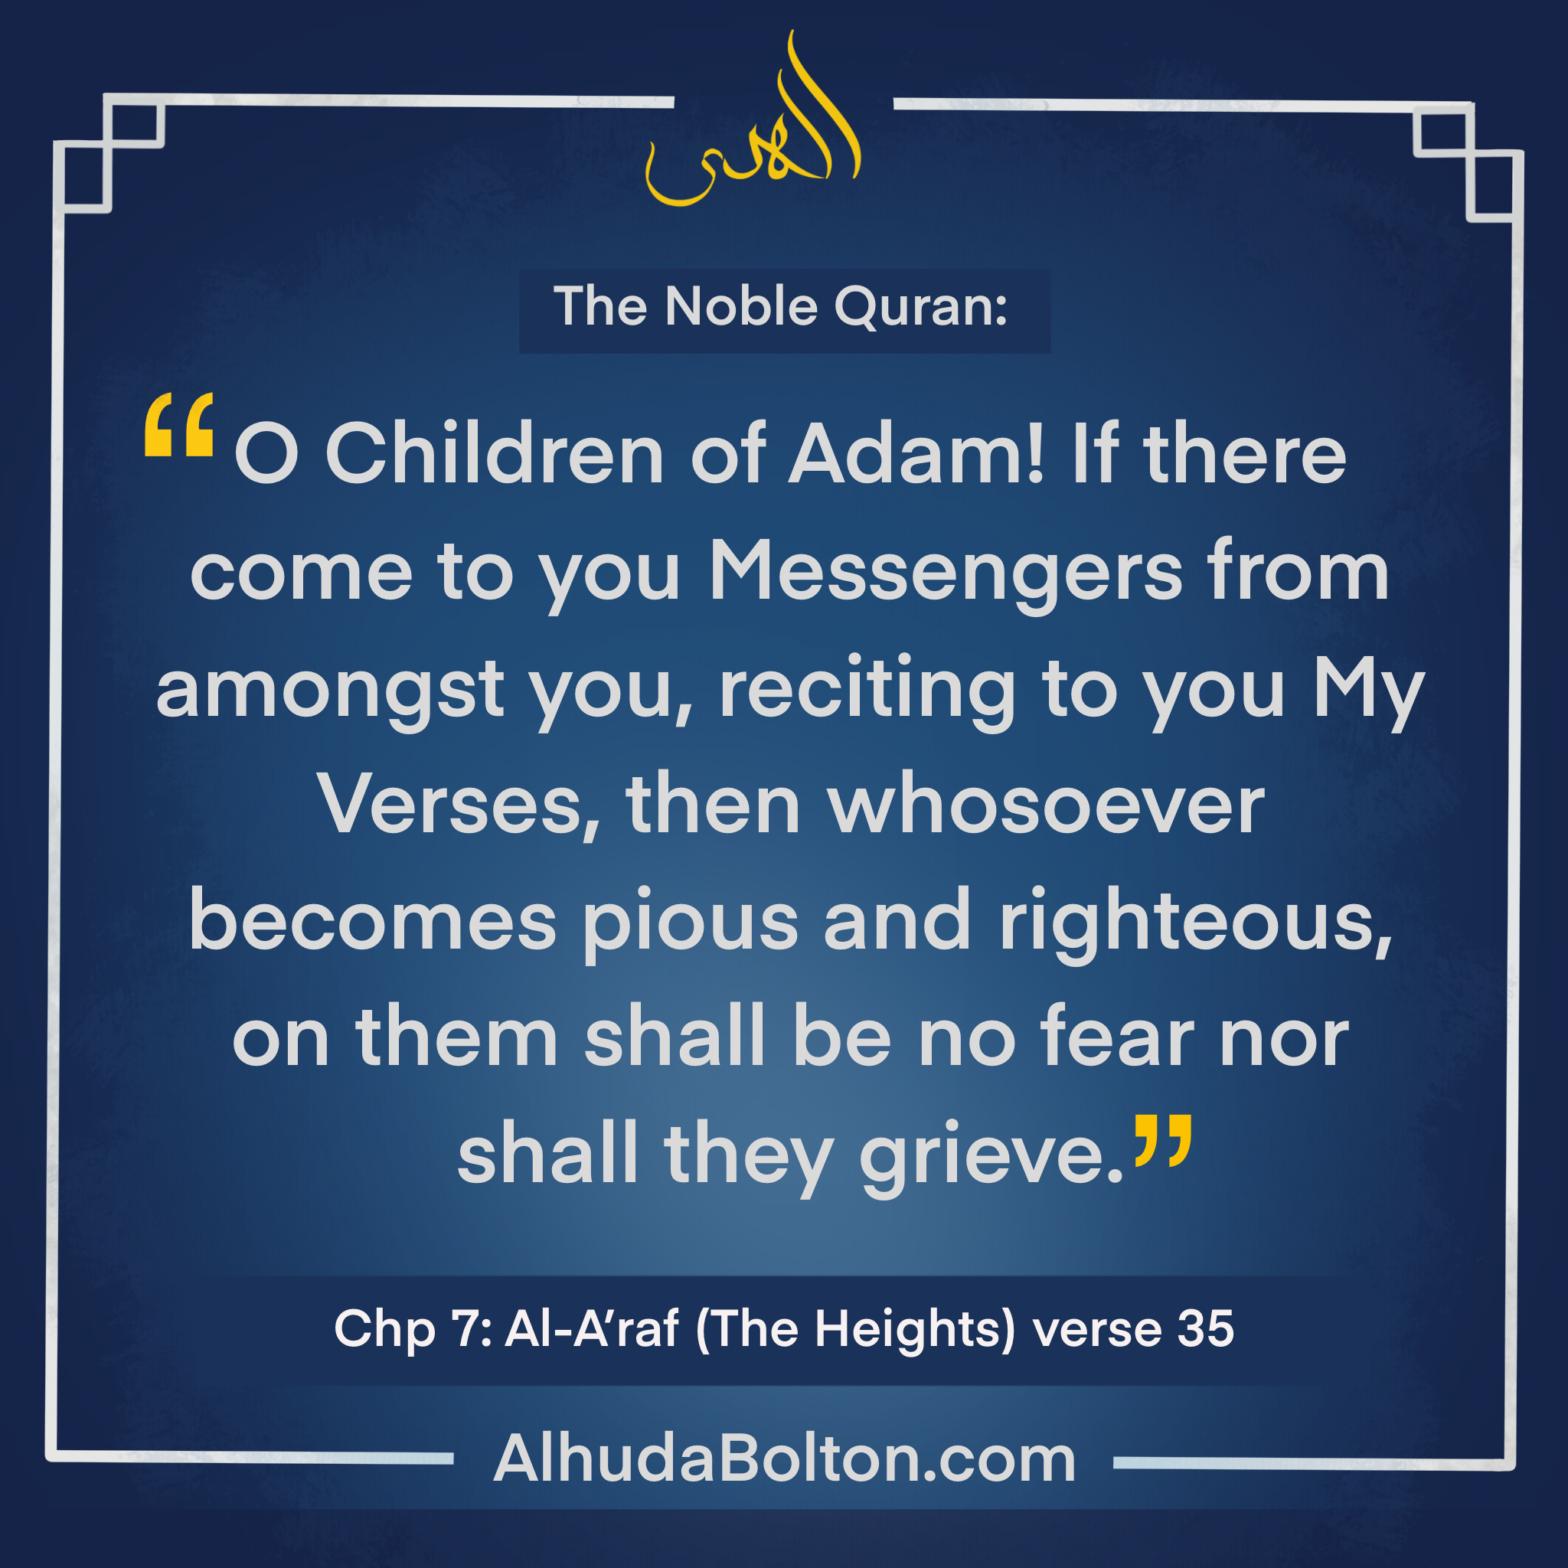 Weekly Quran: “If there come to you messengers”